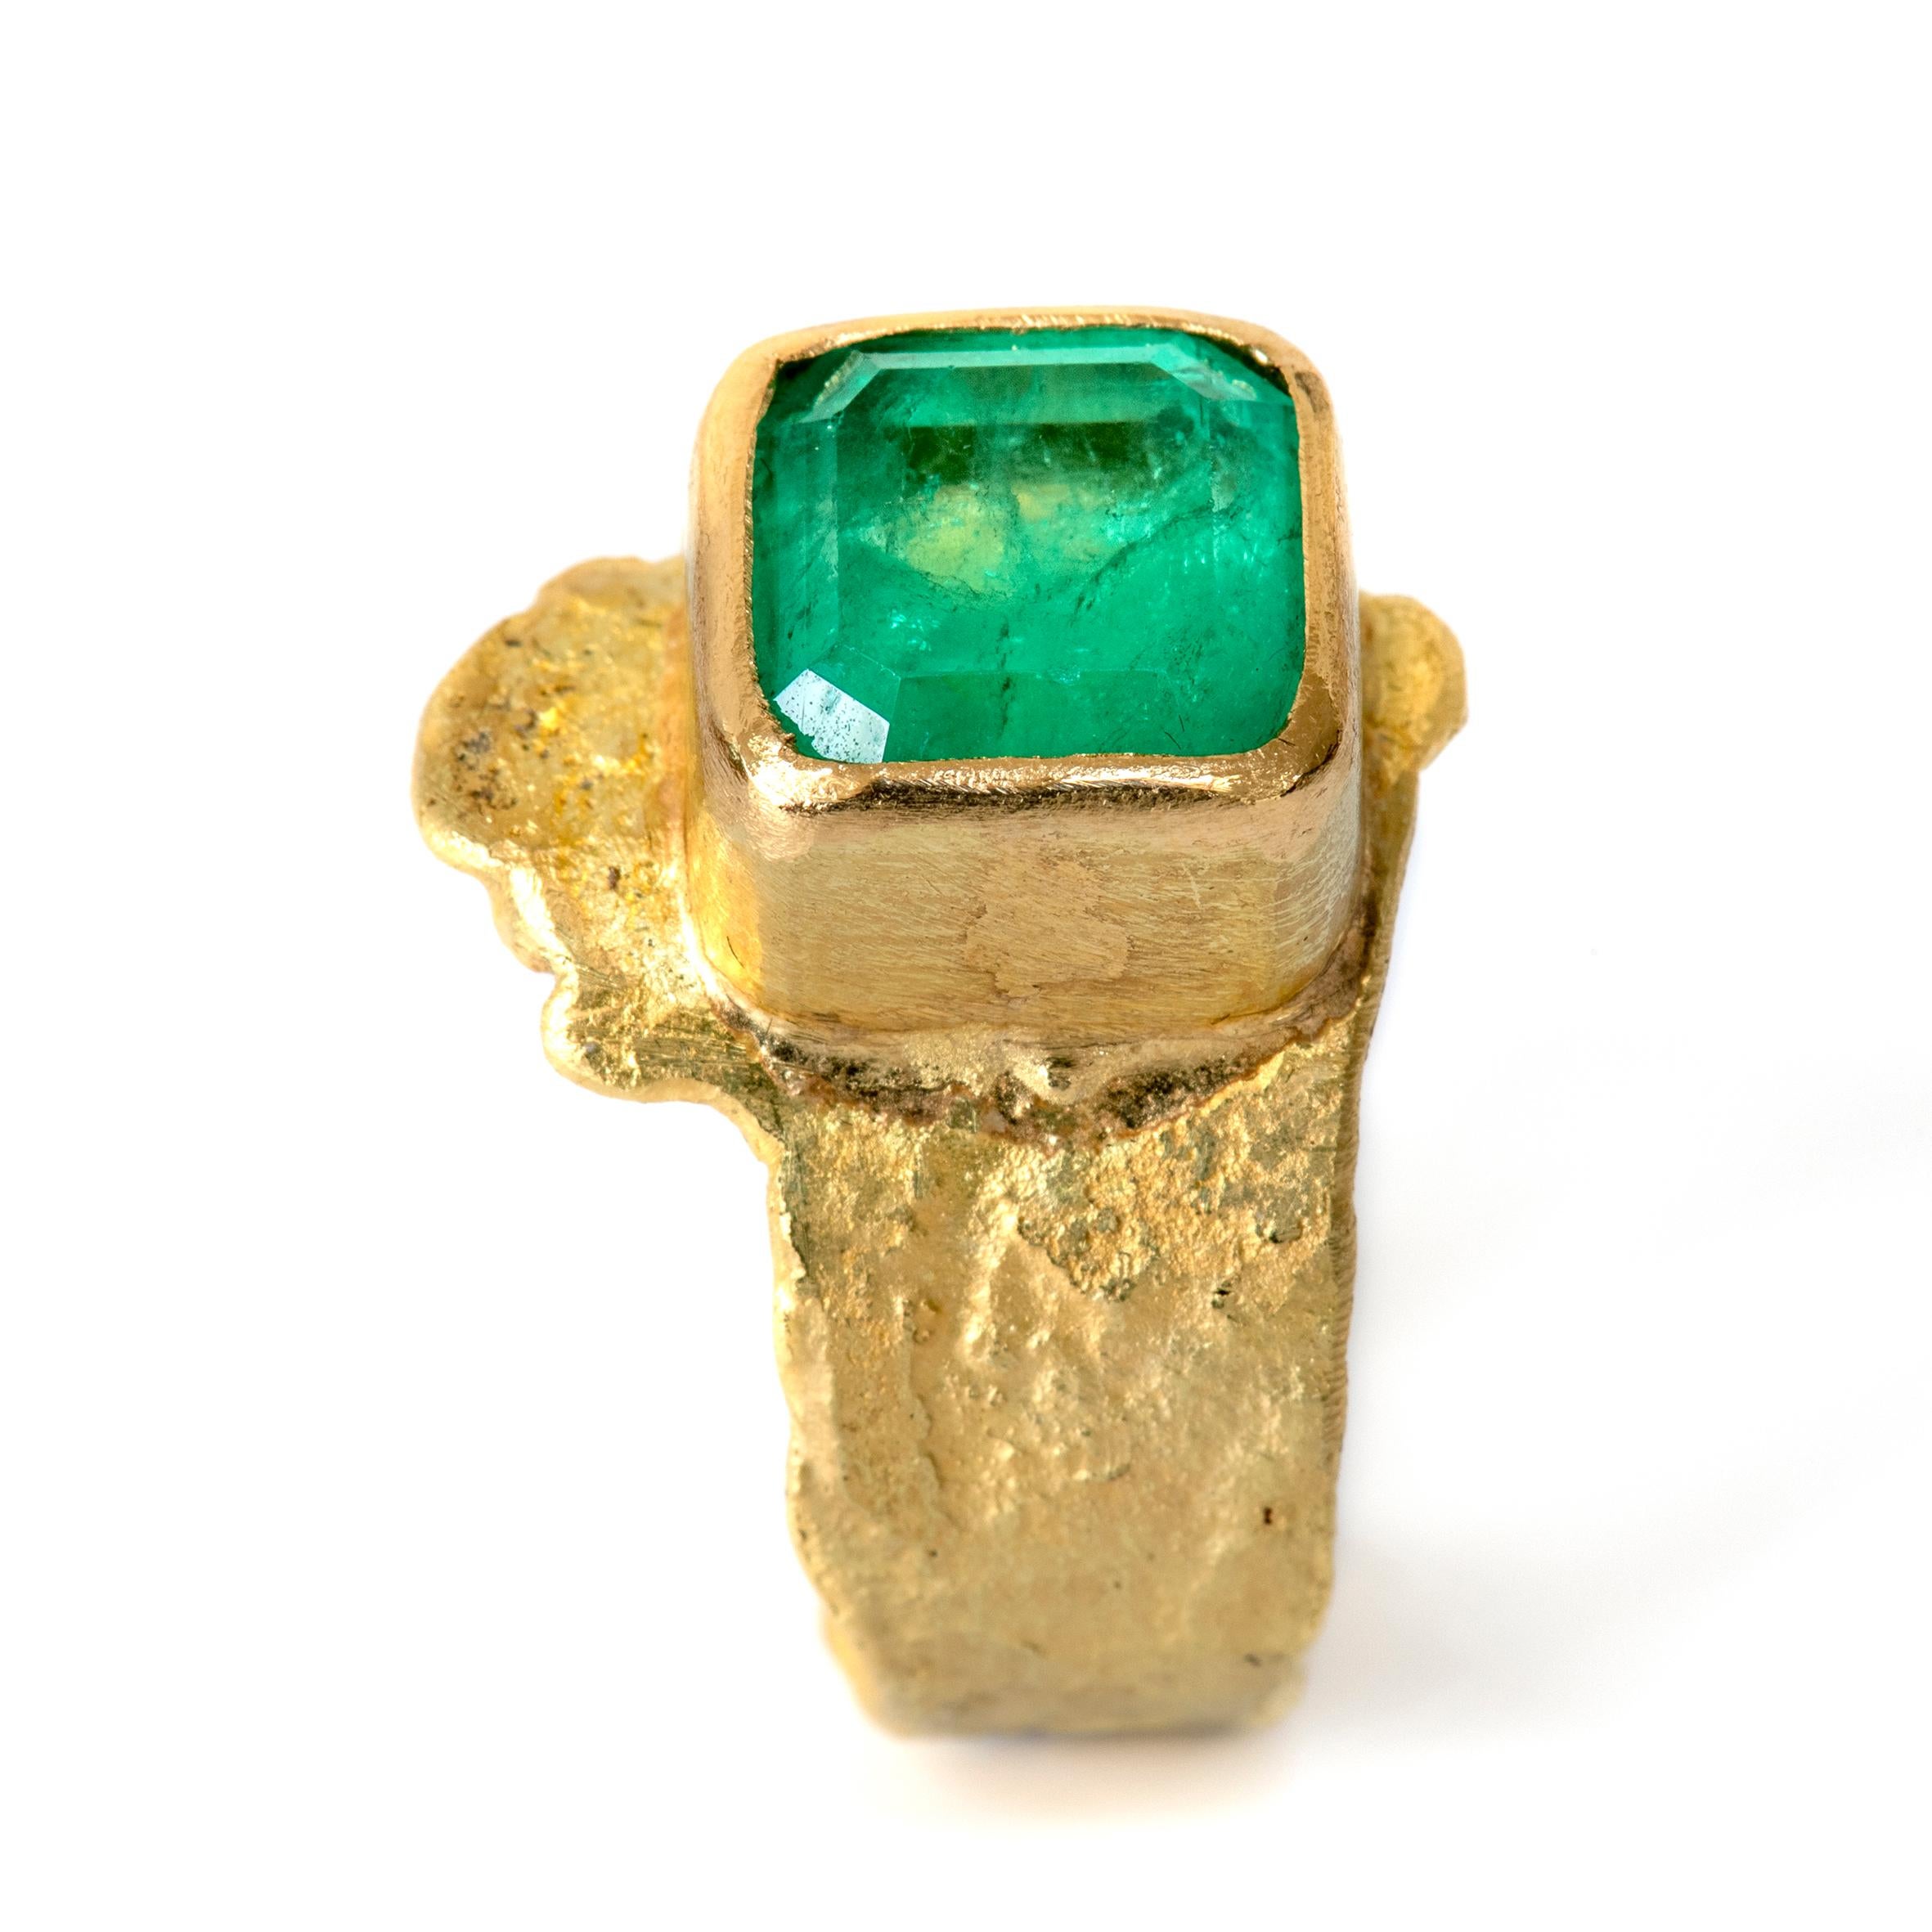 Stunning 4.4 carat Colombian emerald framed in a rub-over setting on a richly textured handmade 18k gold ring.
Disa Allsopp is an internationally recognised Goldsmith known for her rich textured metals and colourful handpicked gemstones. 

This